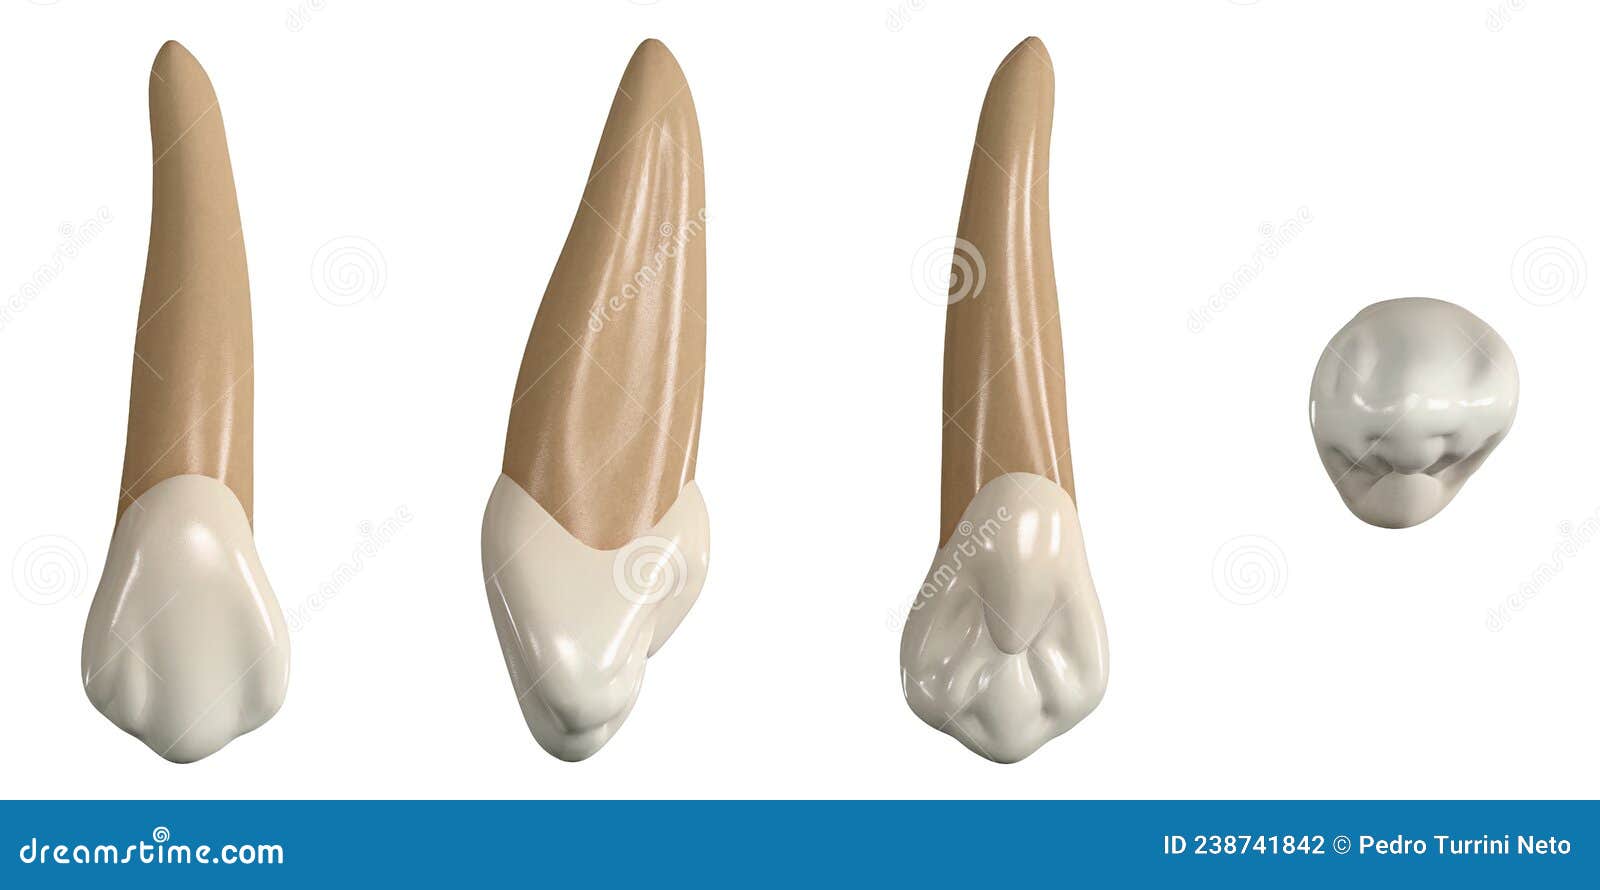 permanent upper canine tooth. 3d  of the anatomy of the maxillary canine tooth in buccal, proximal, lingual and occlus